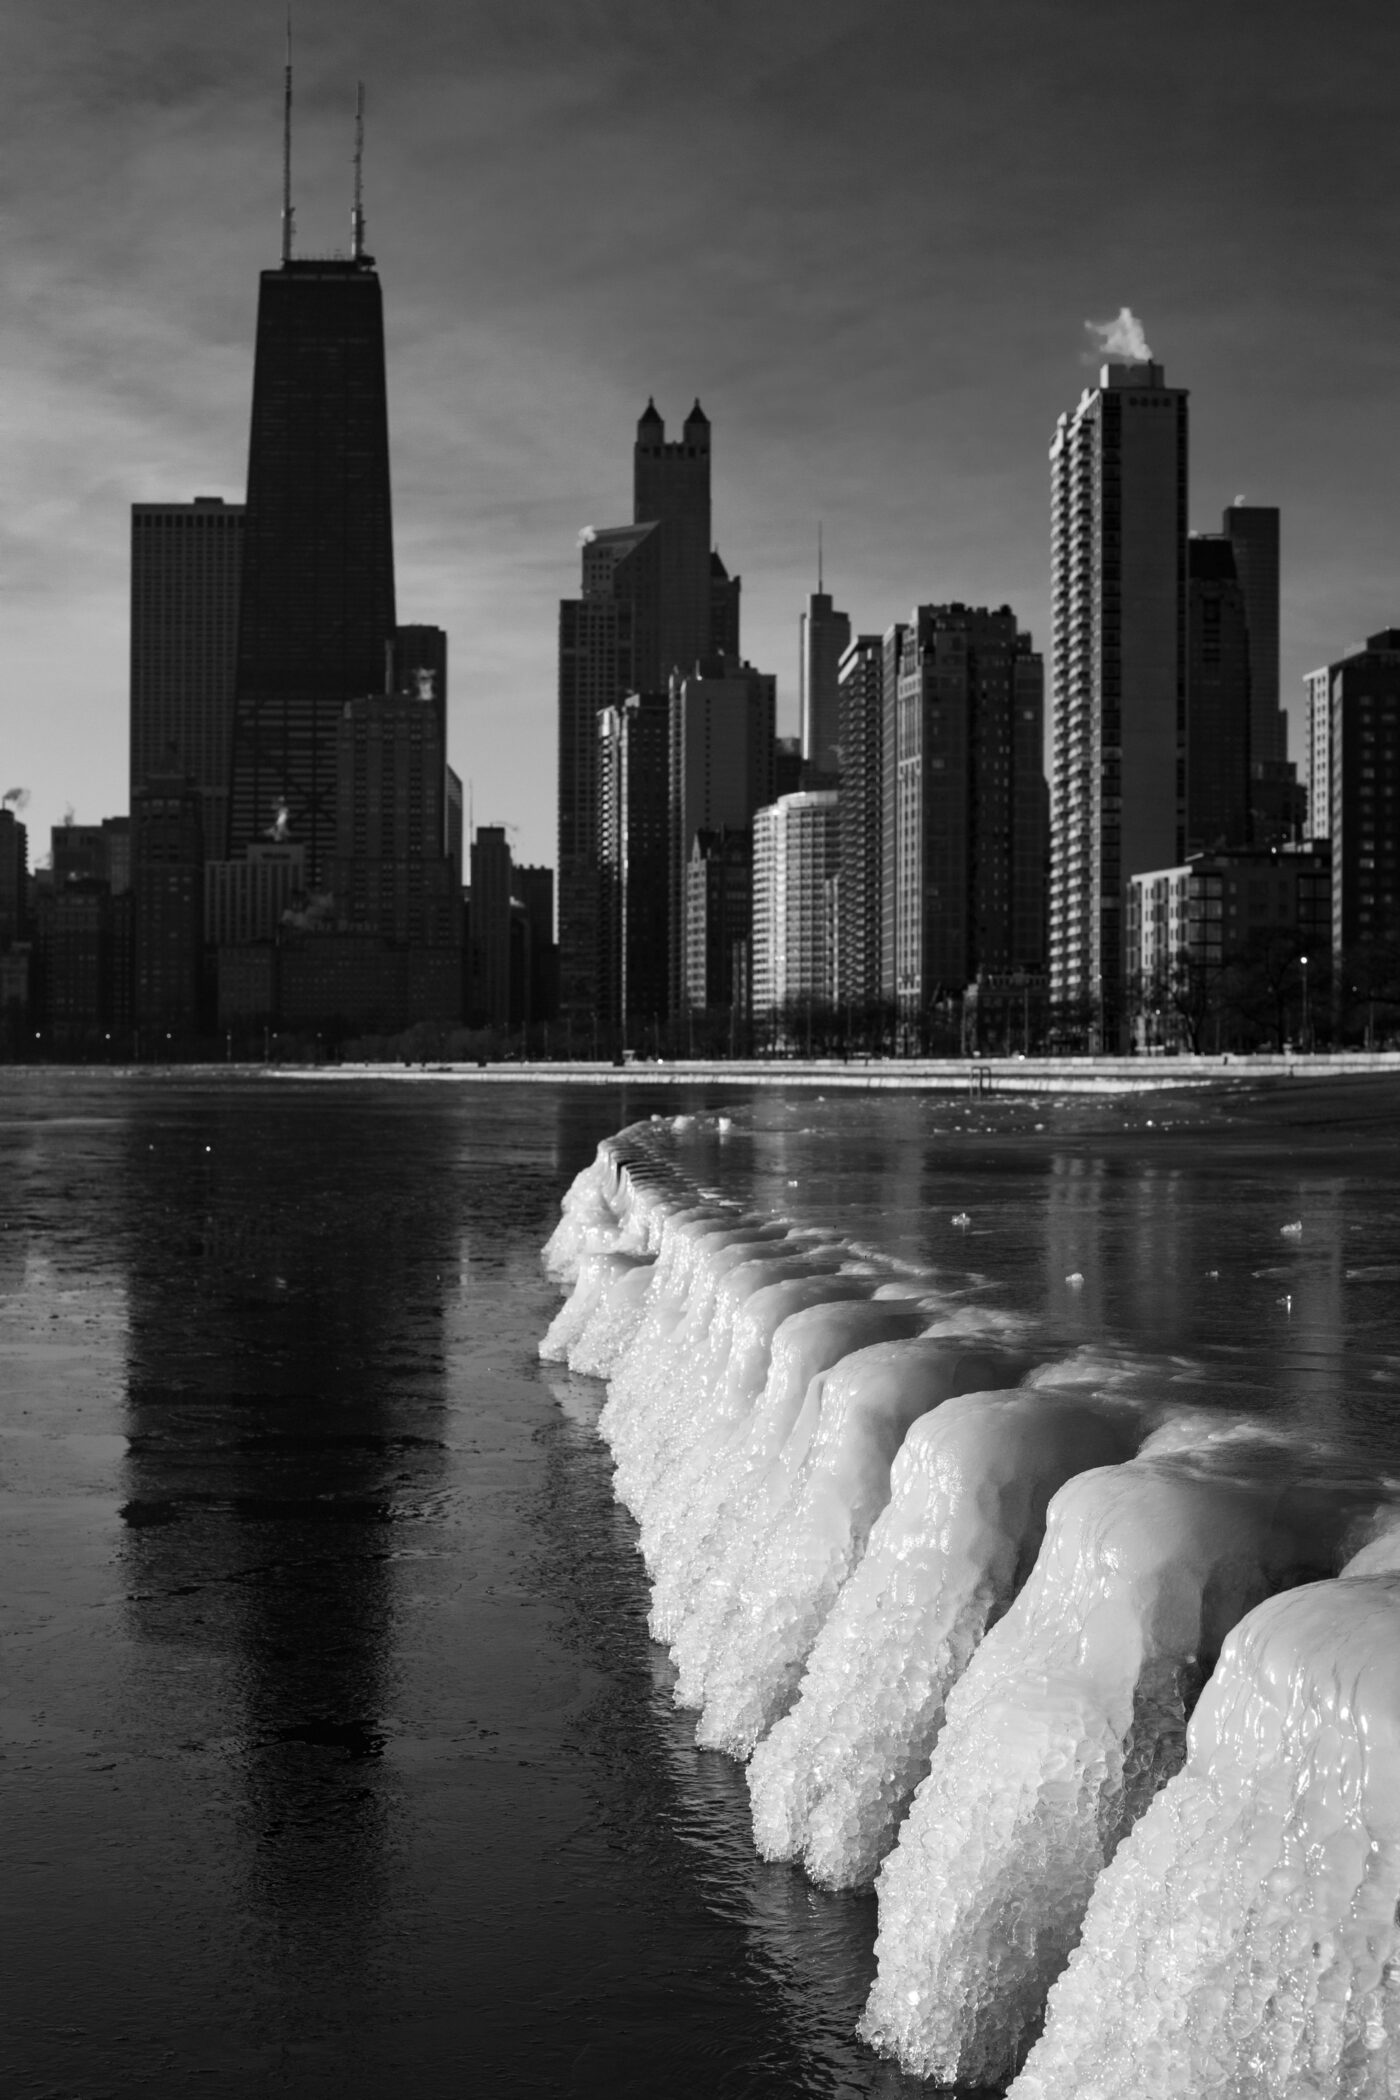 vertical black and white photo of Chicago with a wall of ice leading the eye into the scene